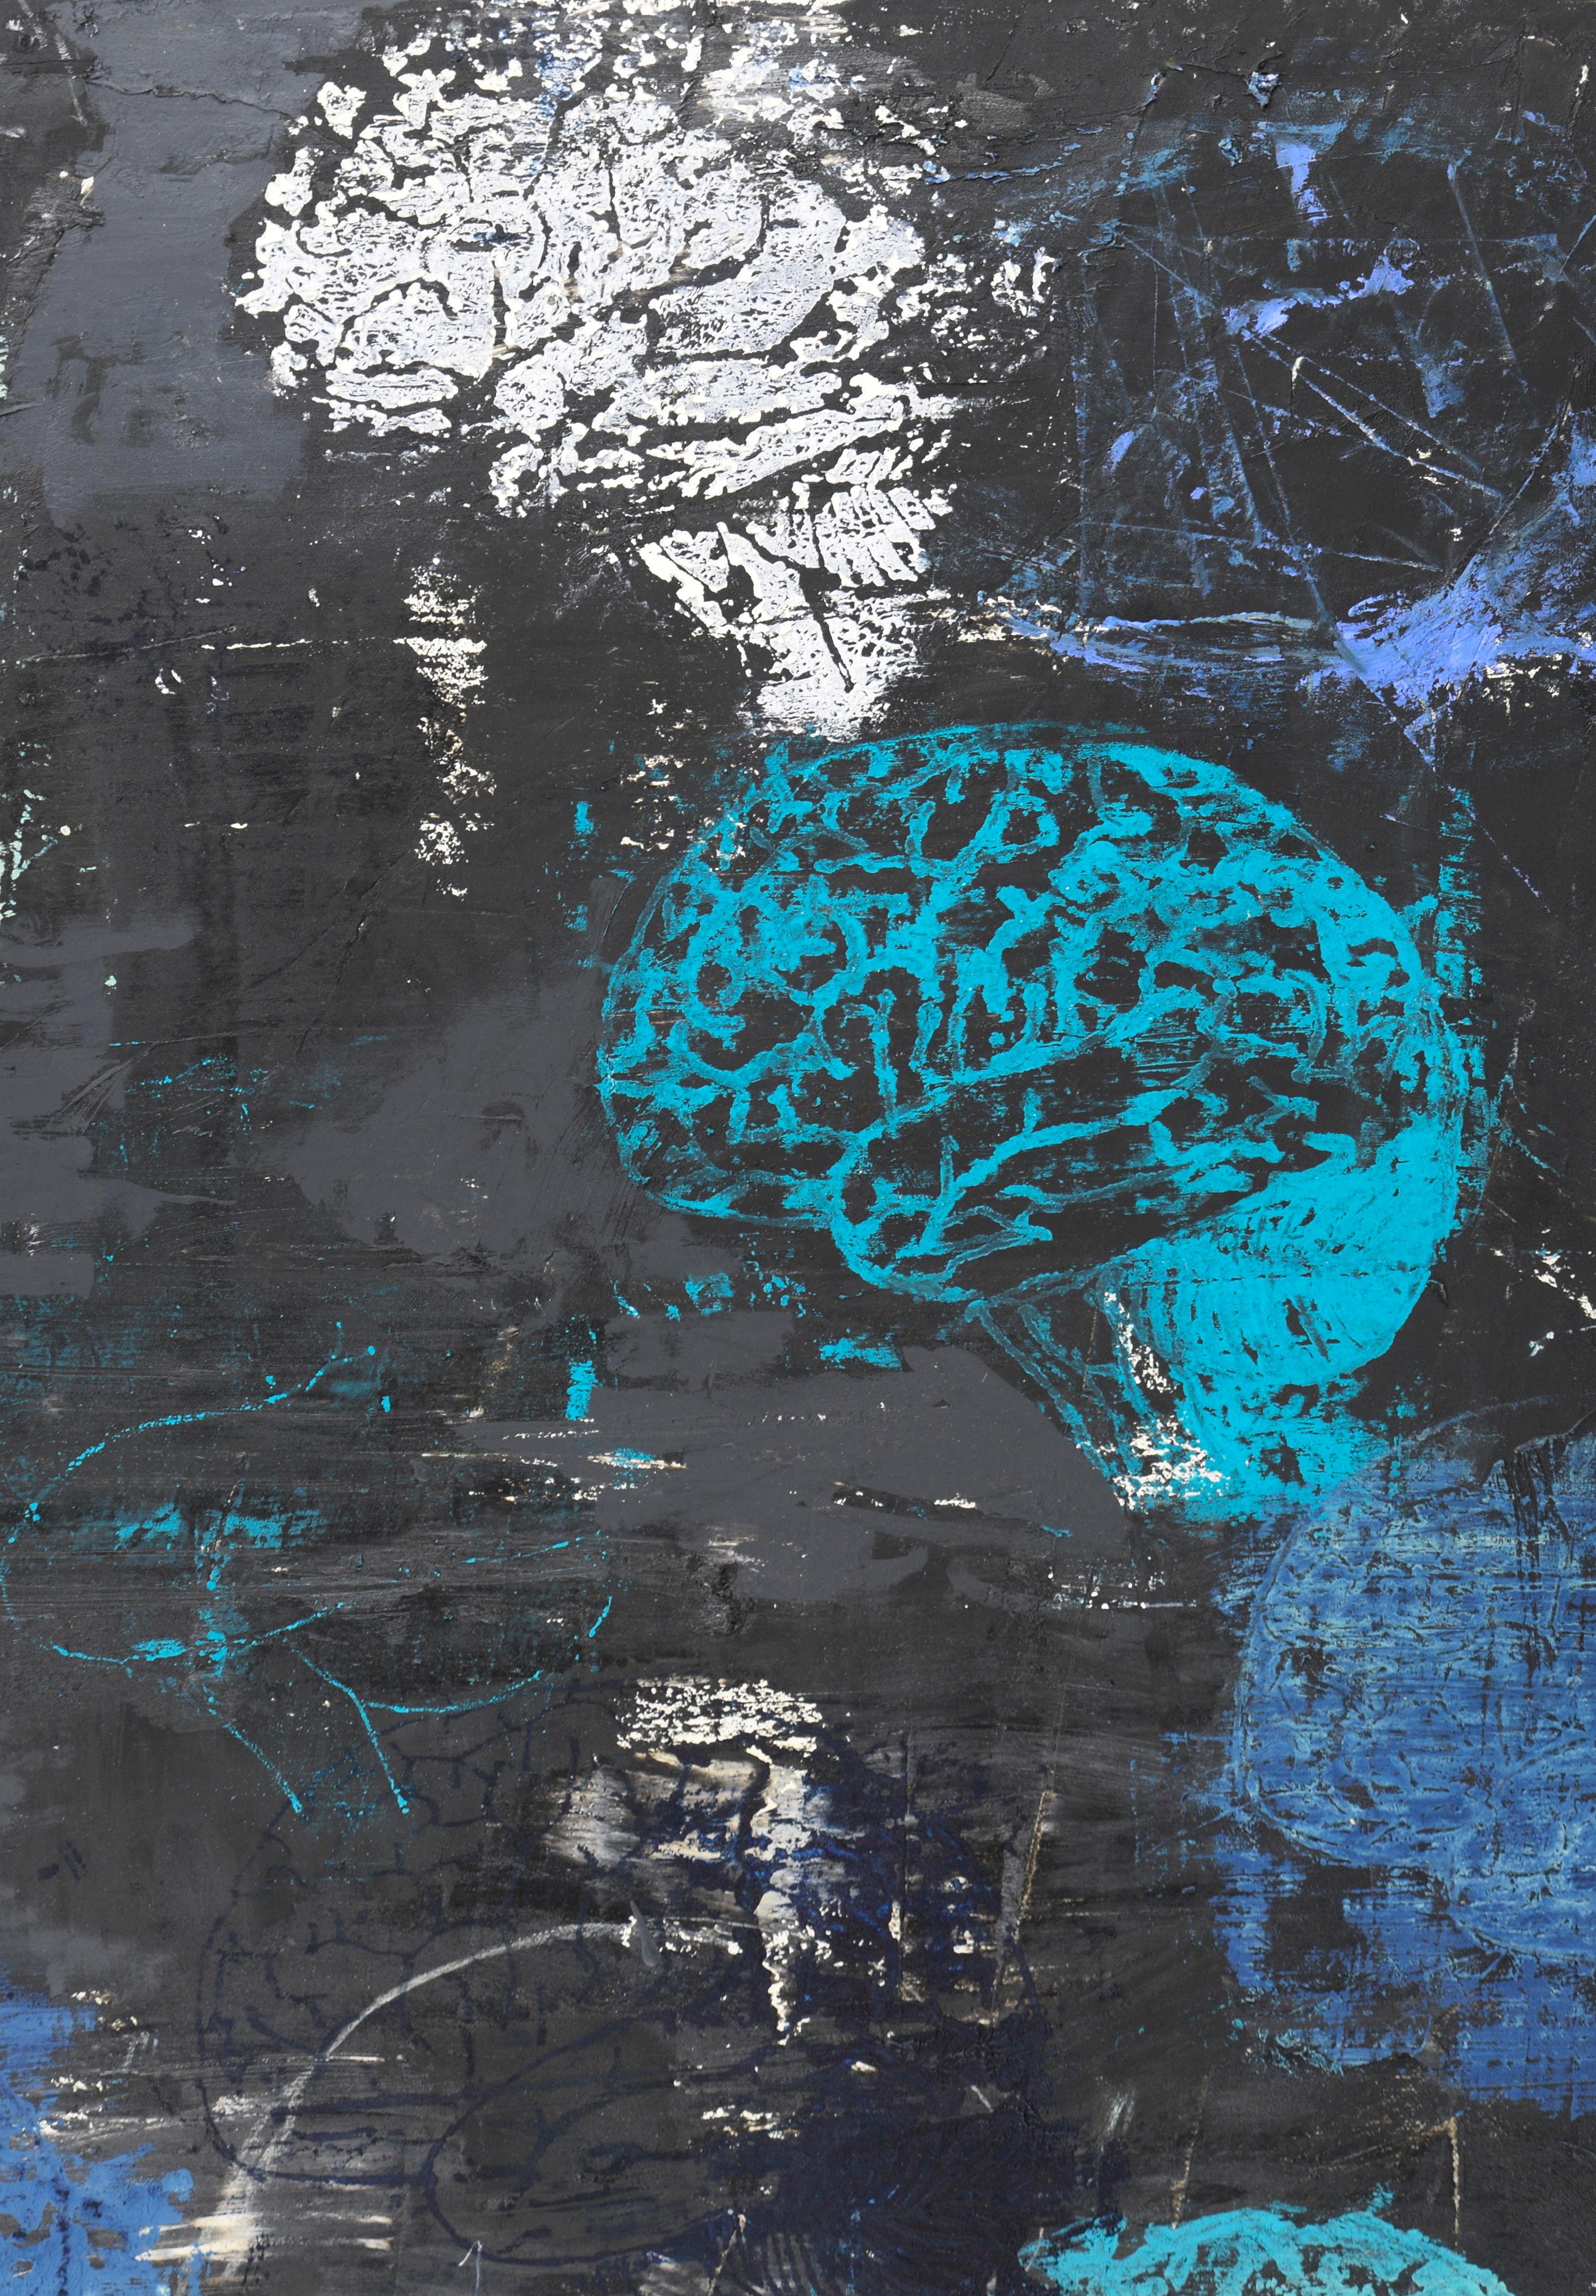 Brainiac VIII Abstract - Large Scale Abstract with Blue, White, & Black - Painting by Michael Pauker 